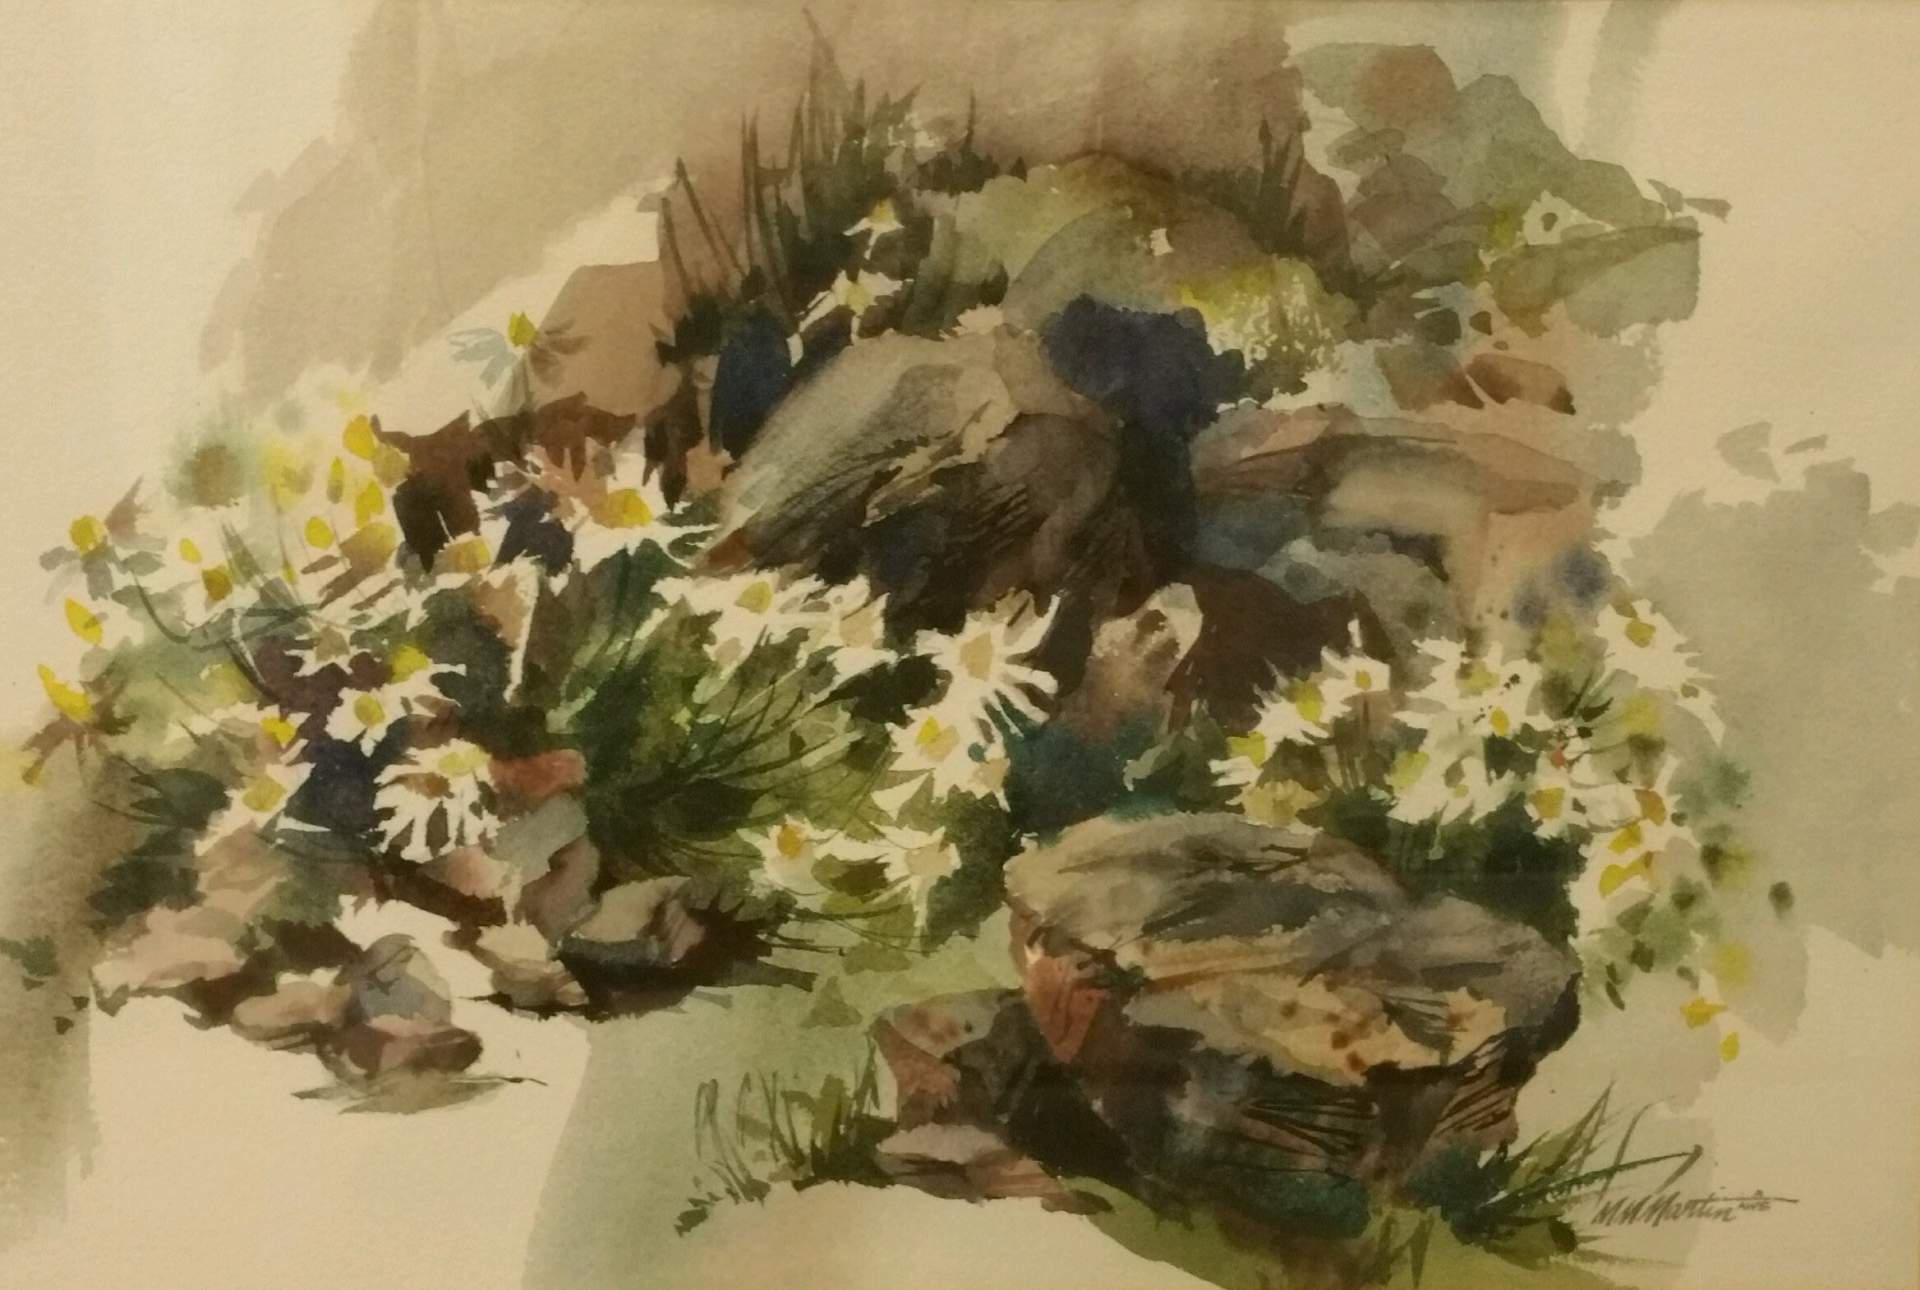 Untitled (rocks and daisies)